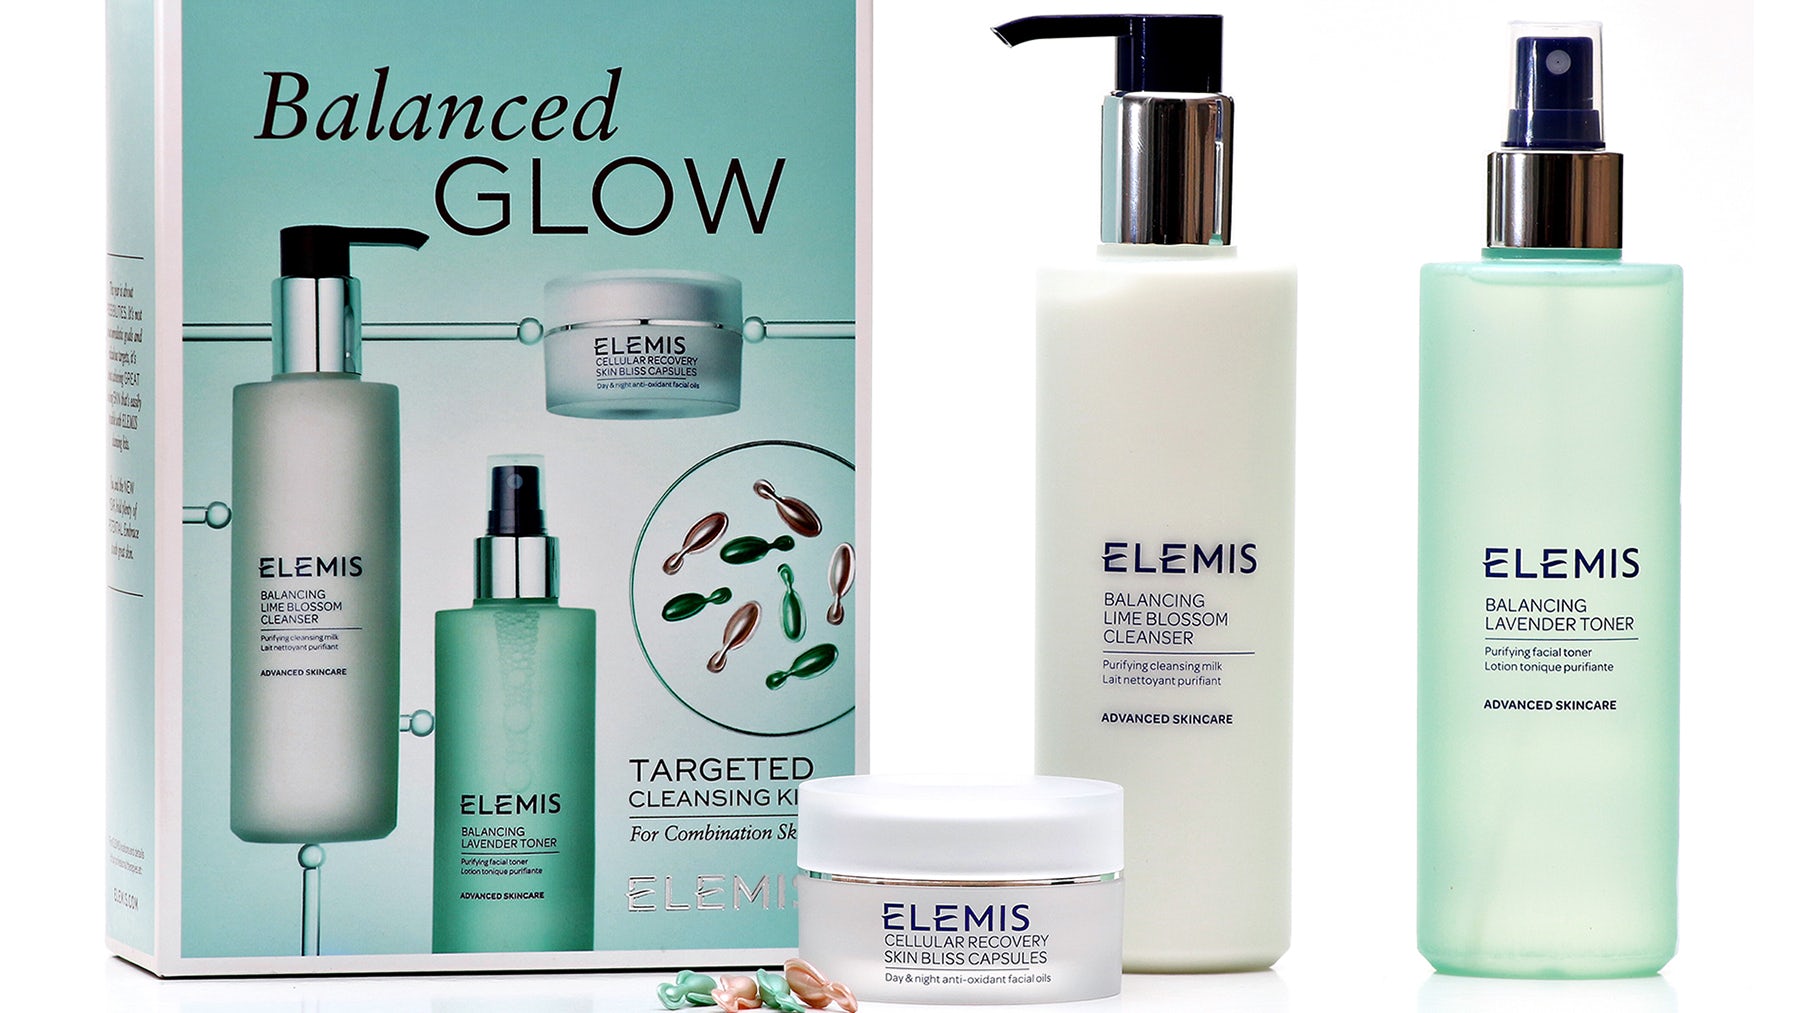 L'Occitane sales and profits rise, expects major benefits from Elemis buy